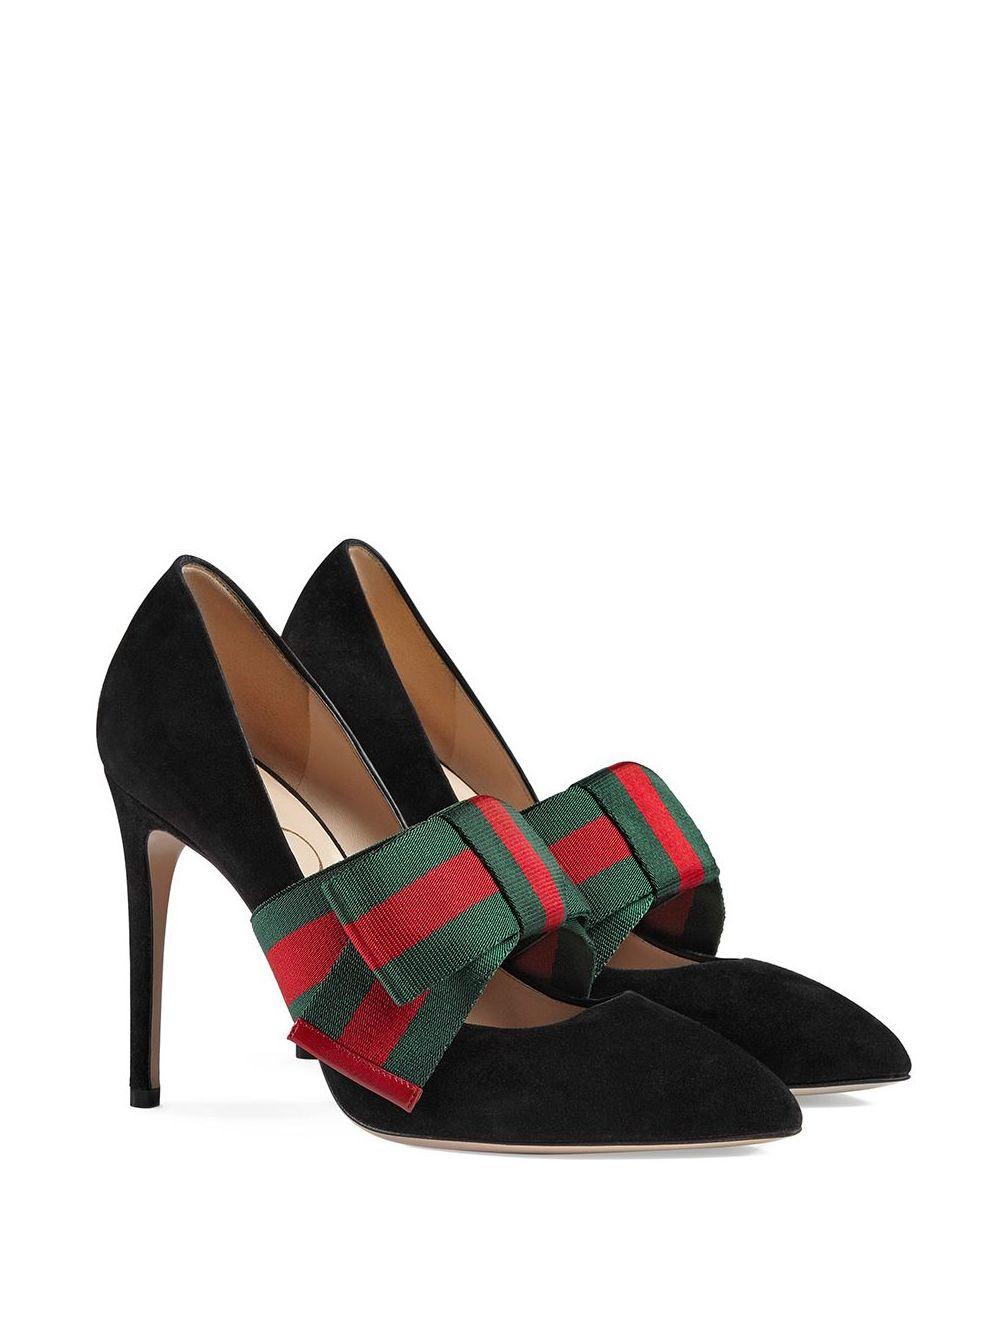 gucci black heels with bow